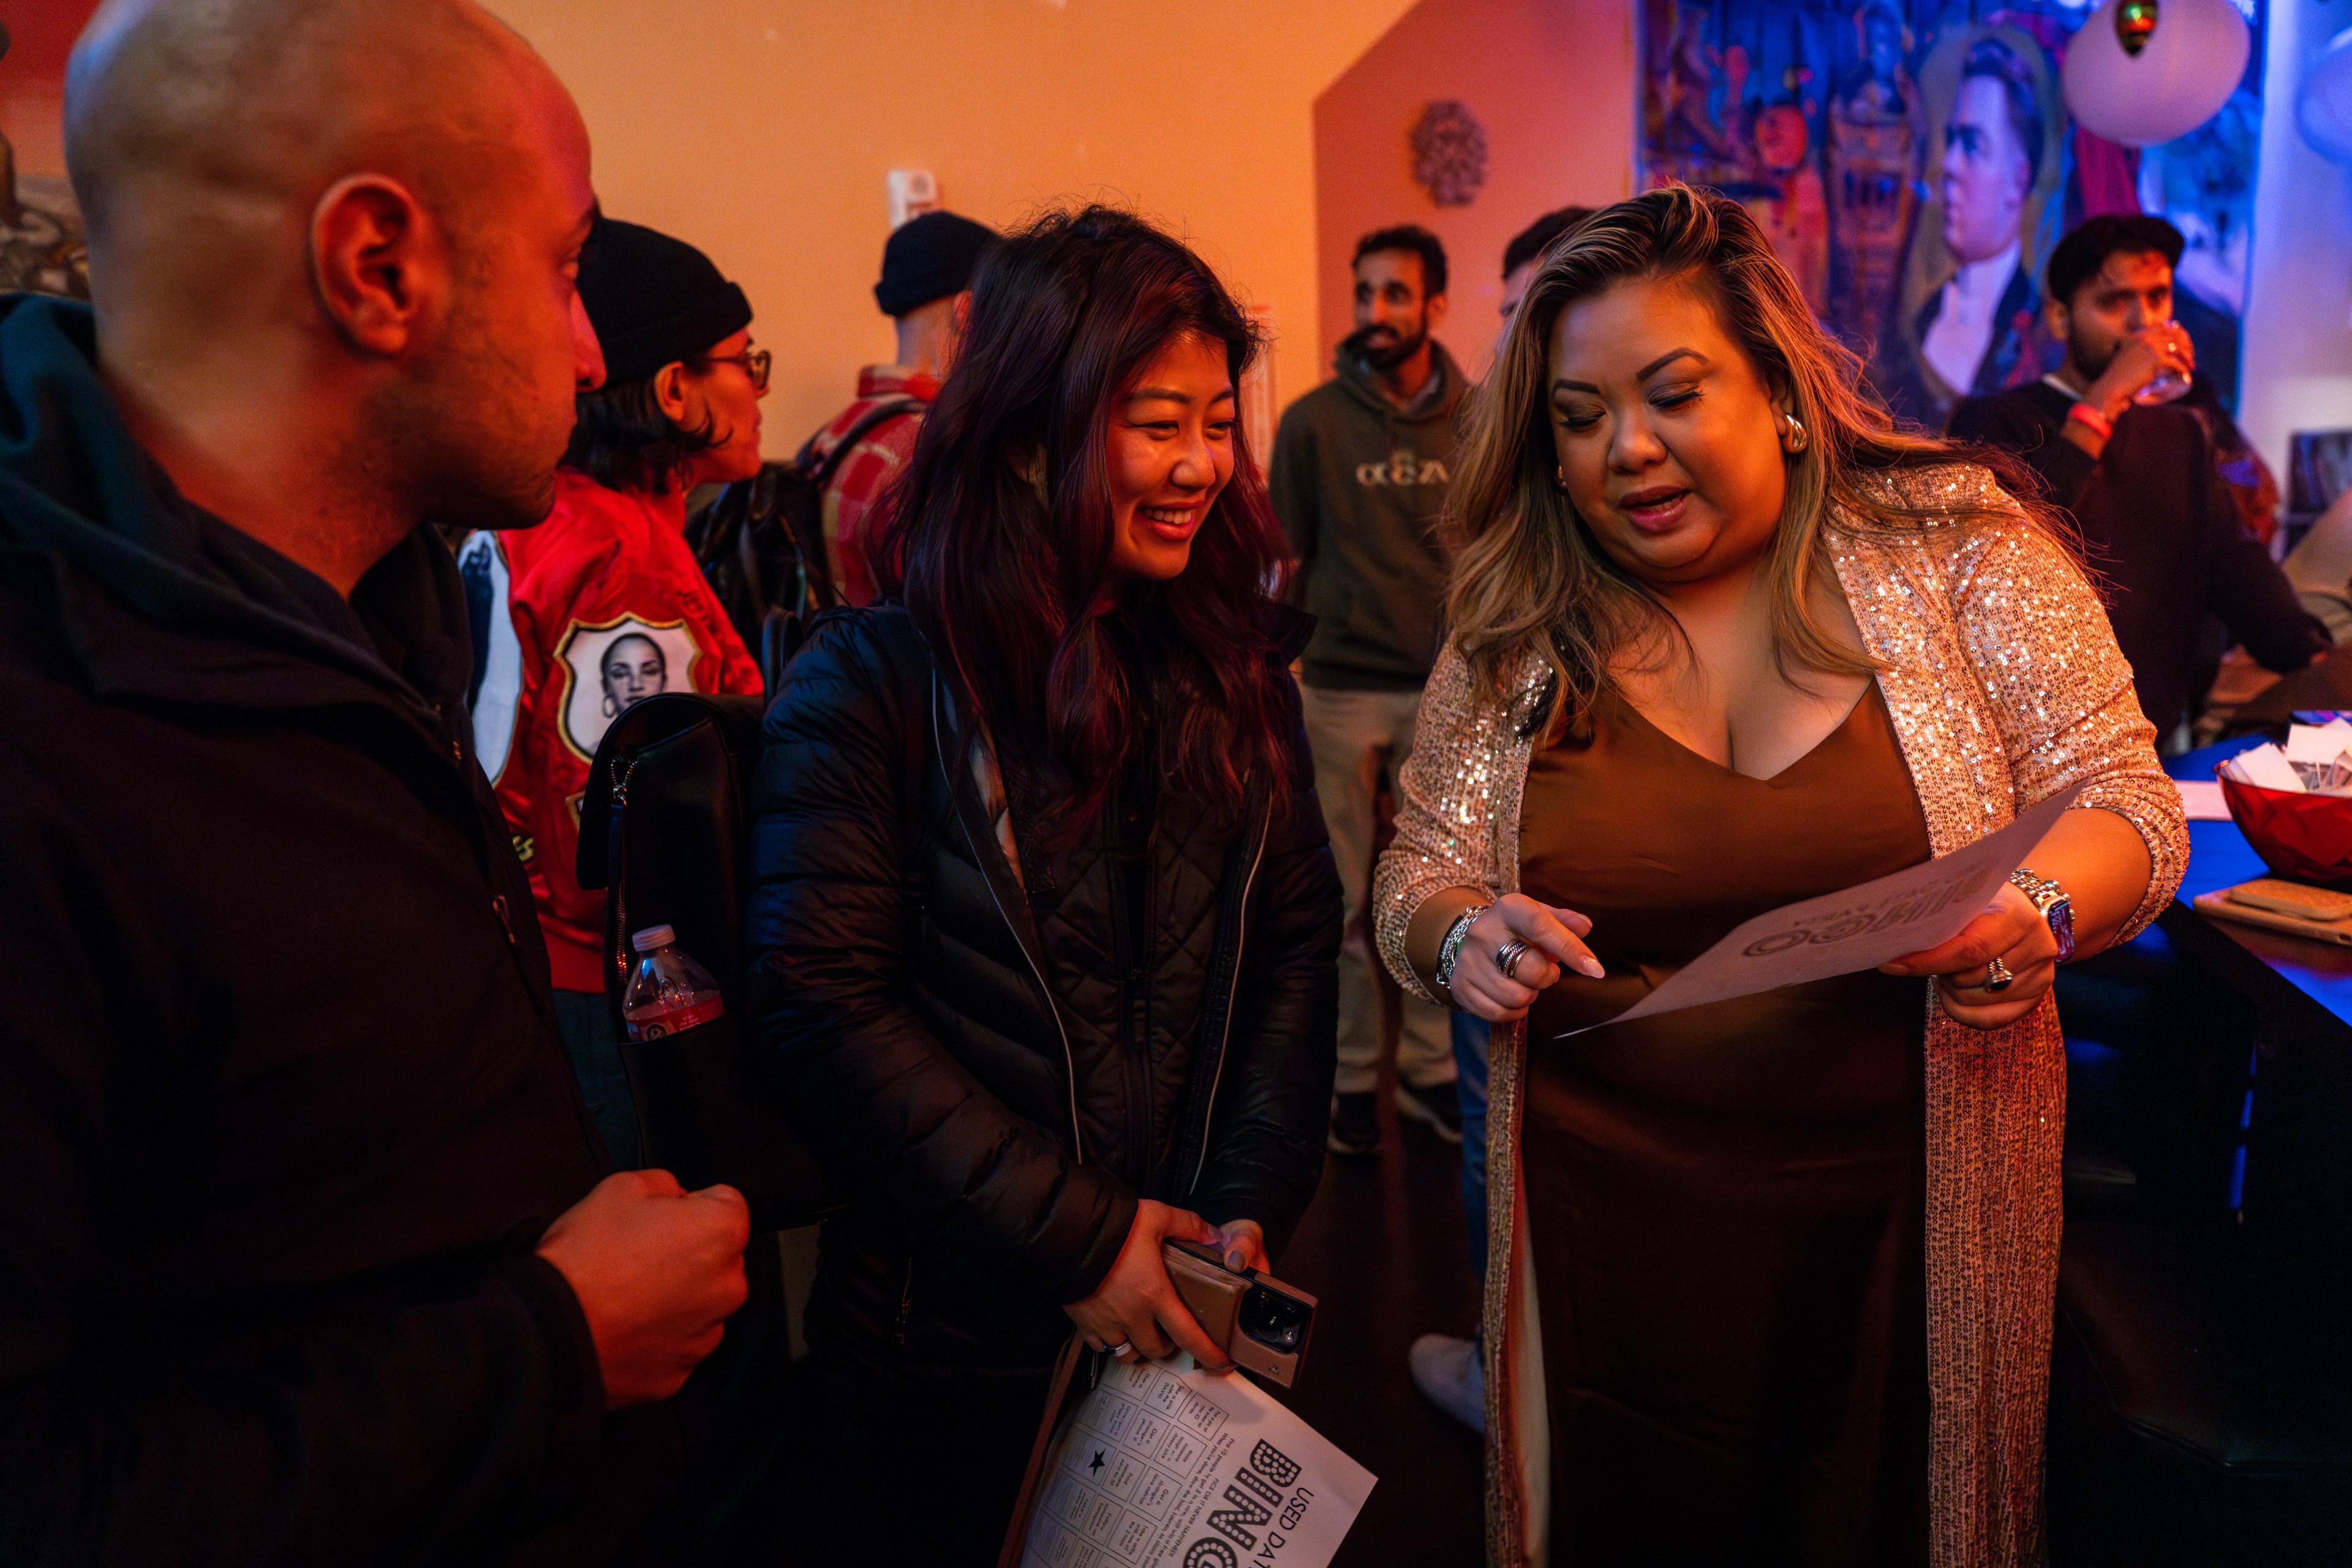 A woman shows a party attendee how to play &quot;Used Date Party&quot; bingo at a single mixers event in a low lit bar in San Francisco.